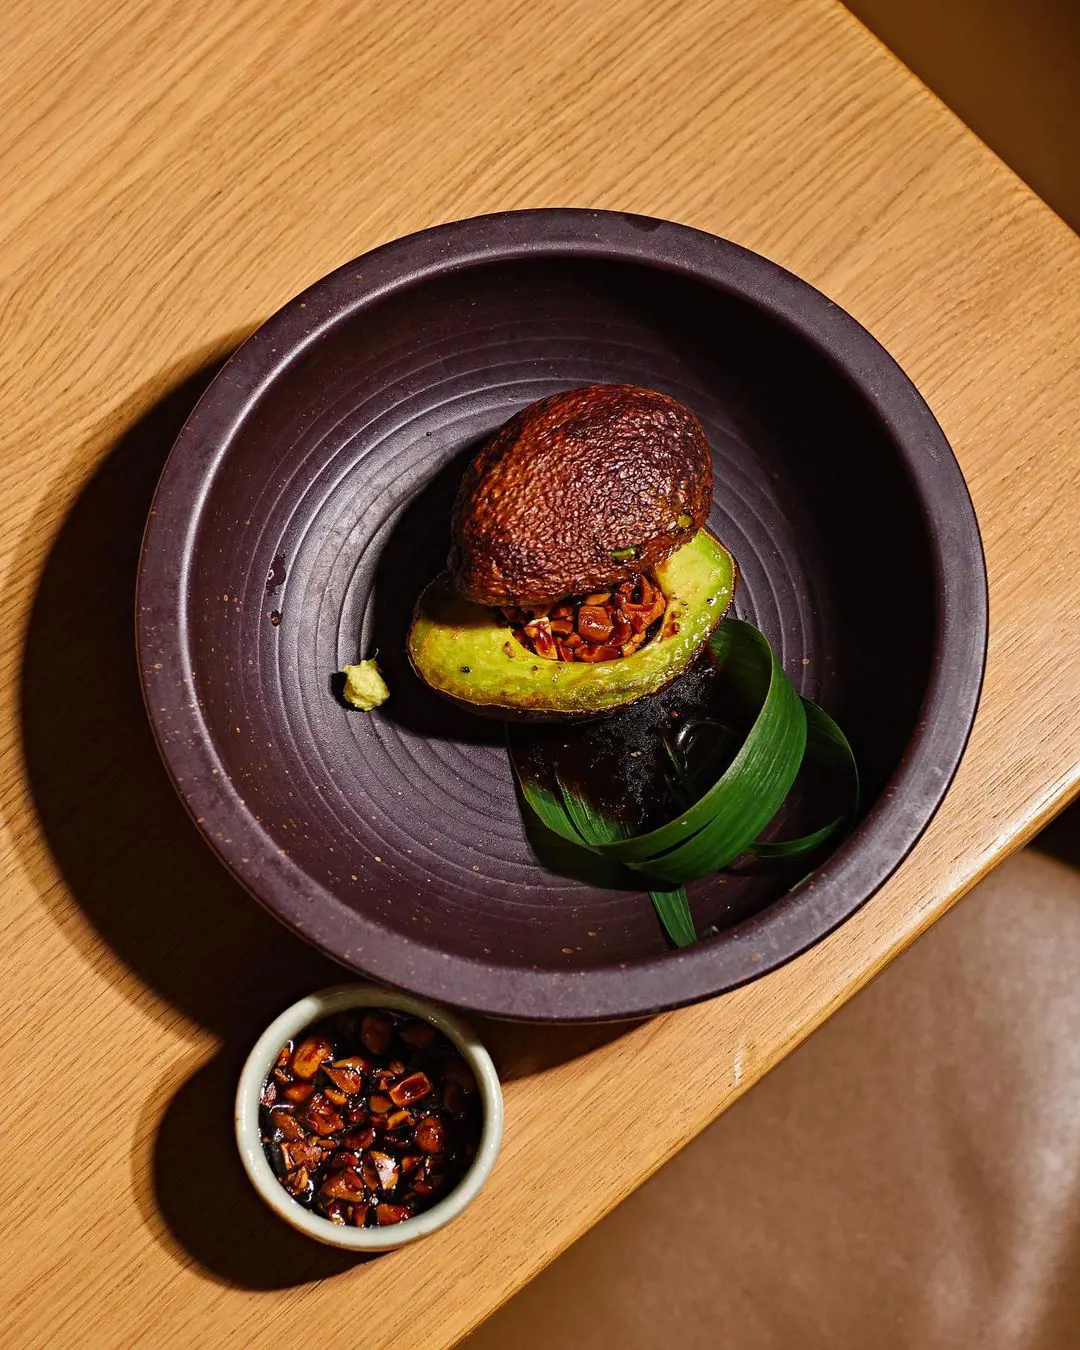 Grilled Arigato Avocado is served with spicy peanut soy